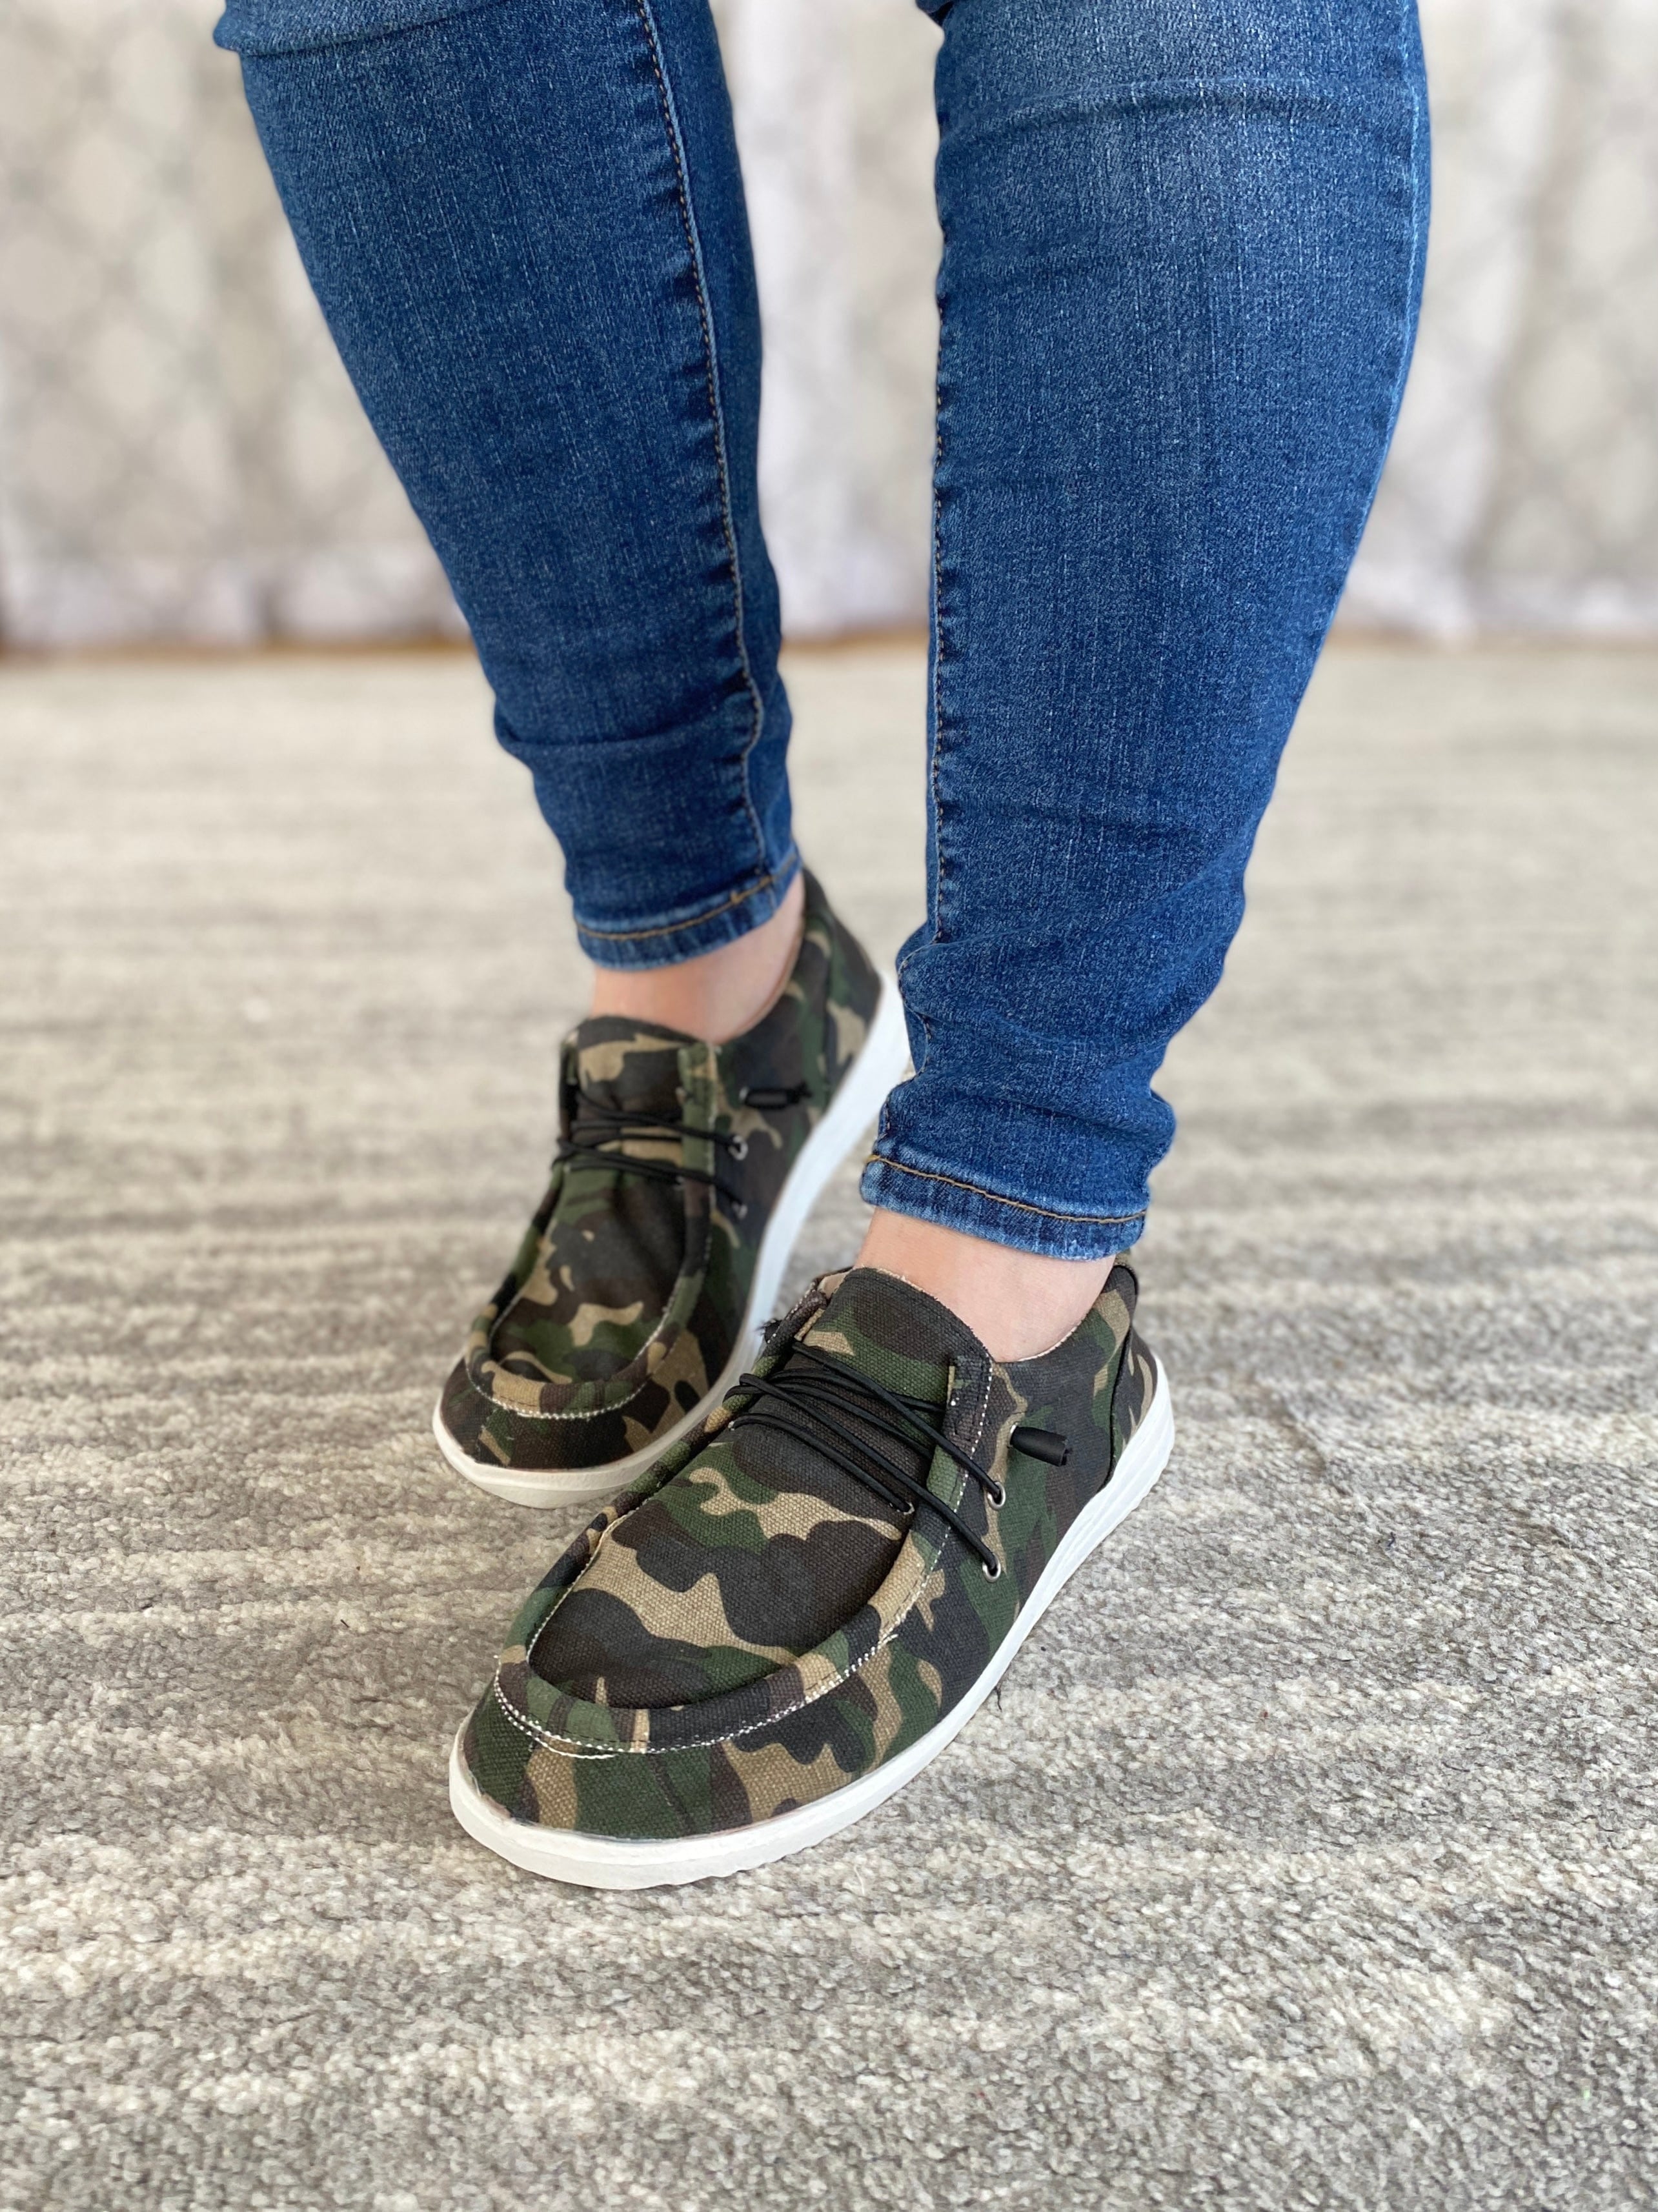 My Walking Burlap Shoes in Camo-Miami Shoes-Stay Foxy Boutique, Florissant, Missouri